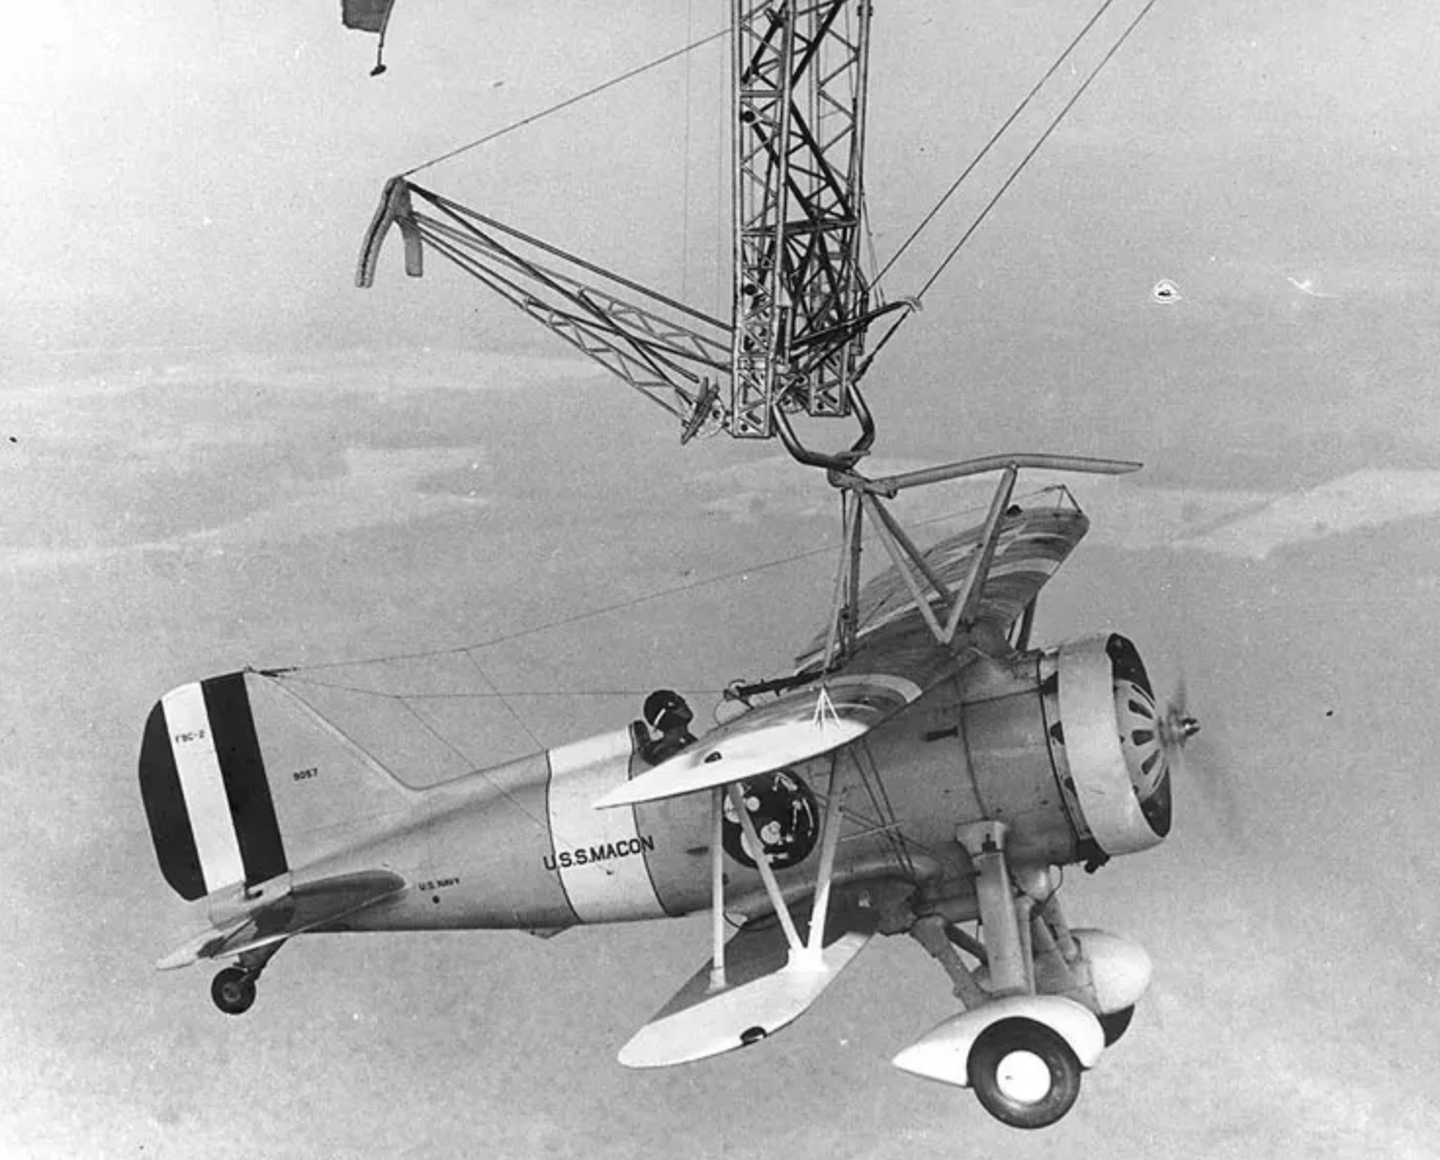 Sparrowhawk scout/fighter aircraft on its exterior rigging (U.S. Navy)